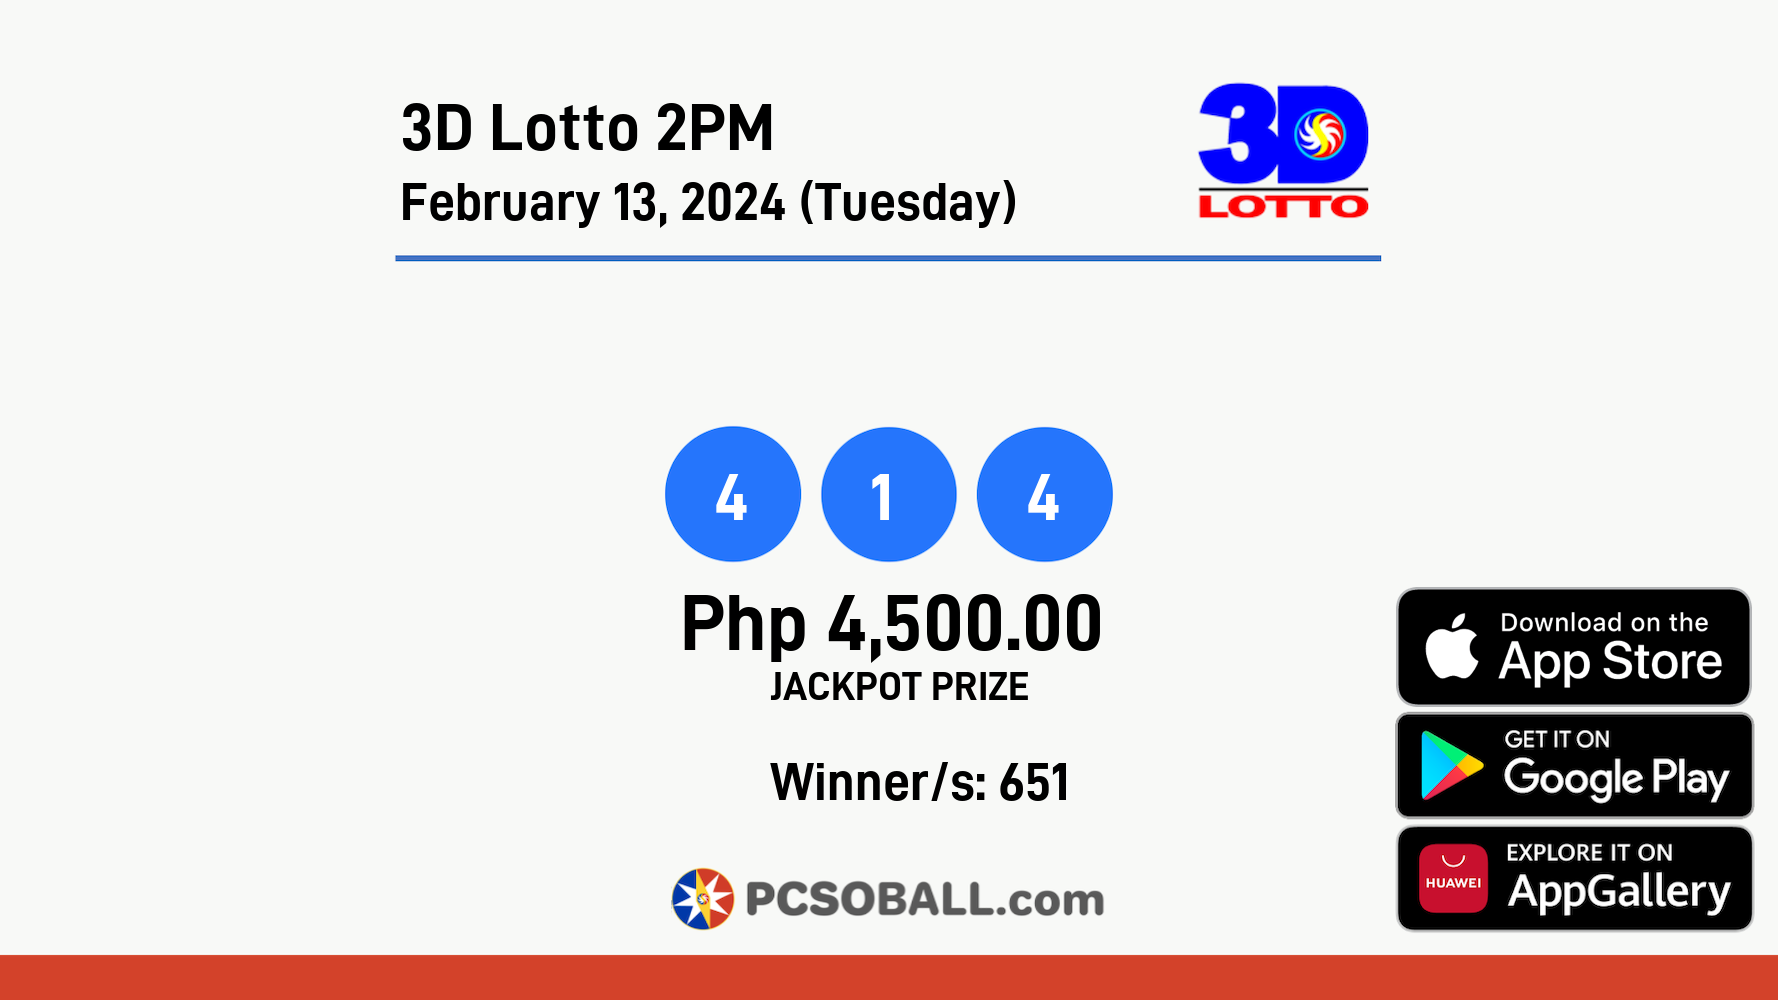 3D Lotto 2PM February 13, 2024 (Tuesday) Result